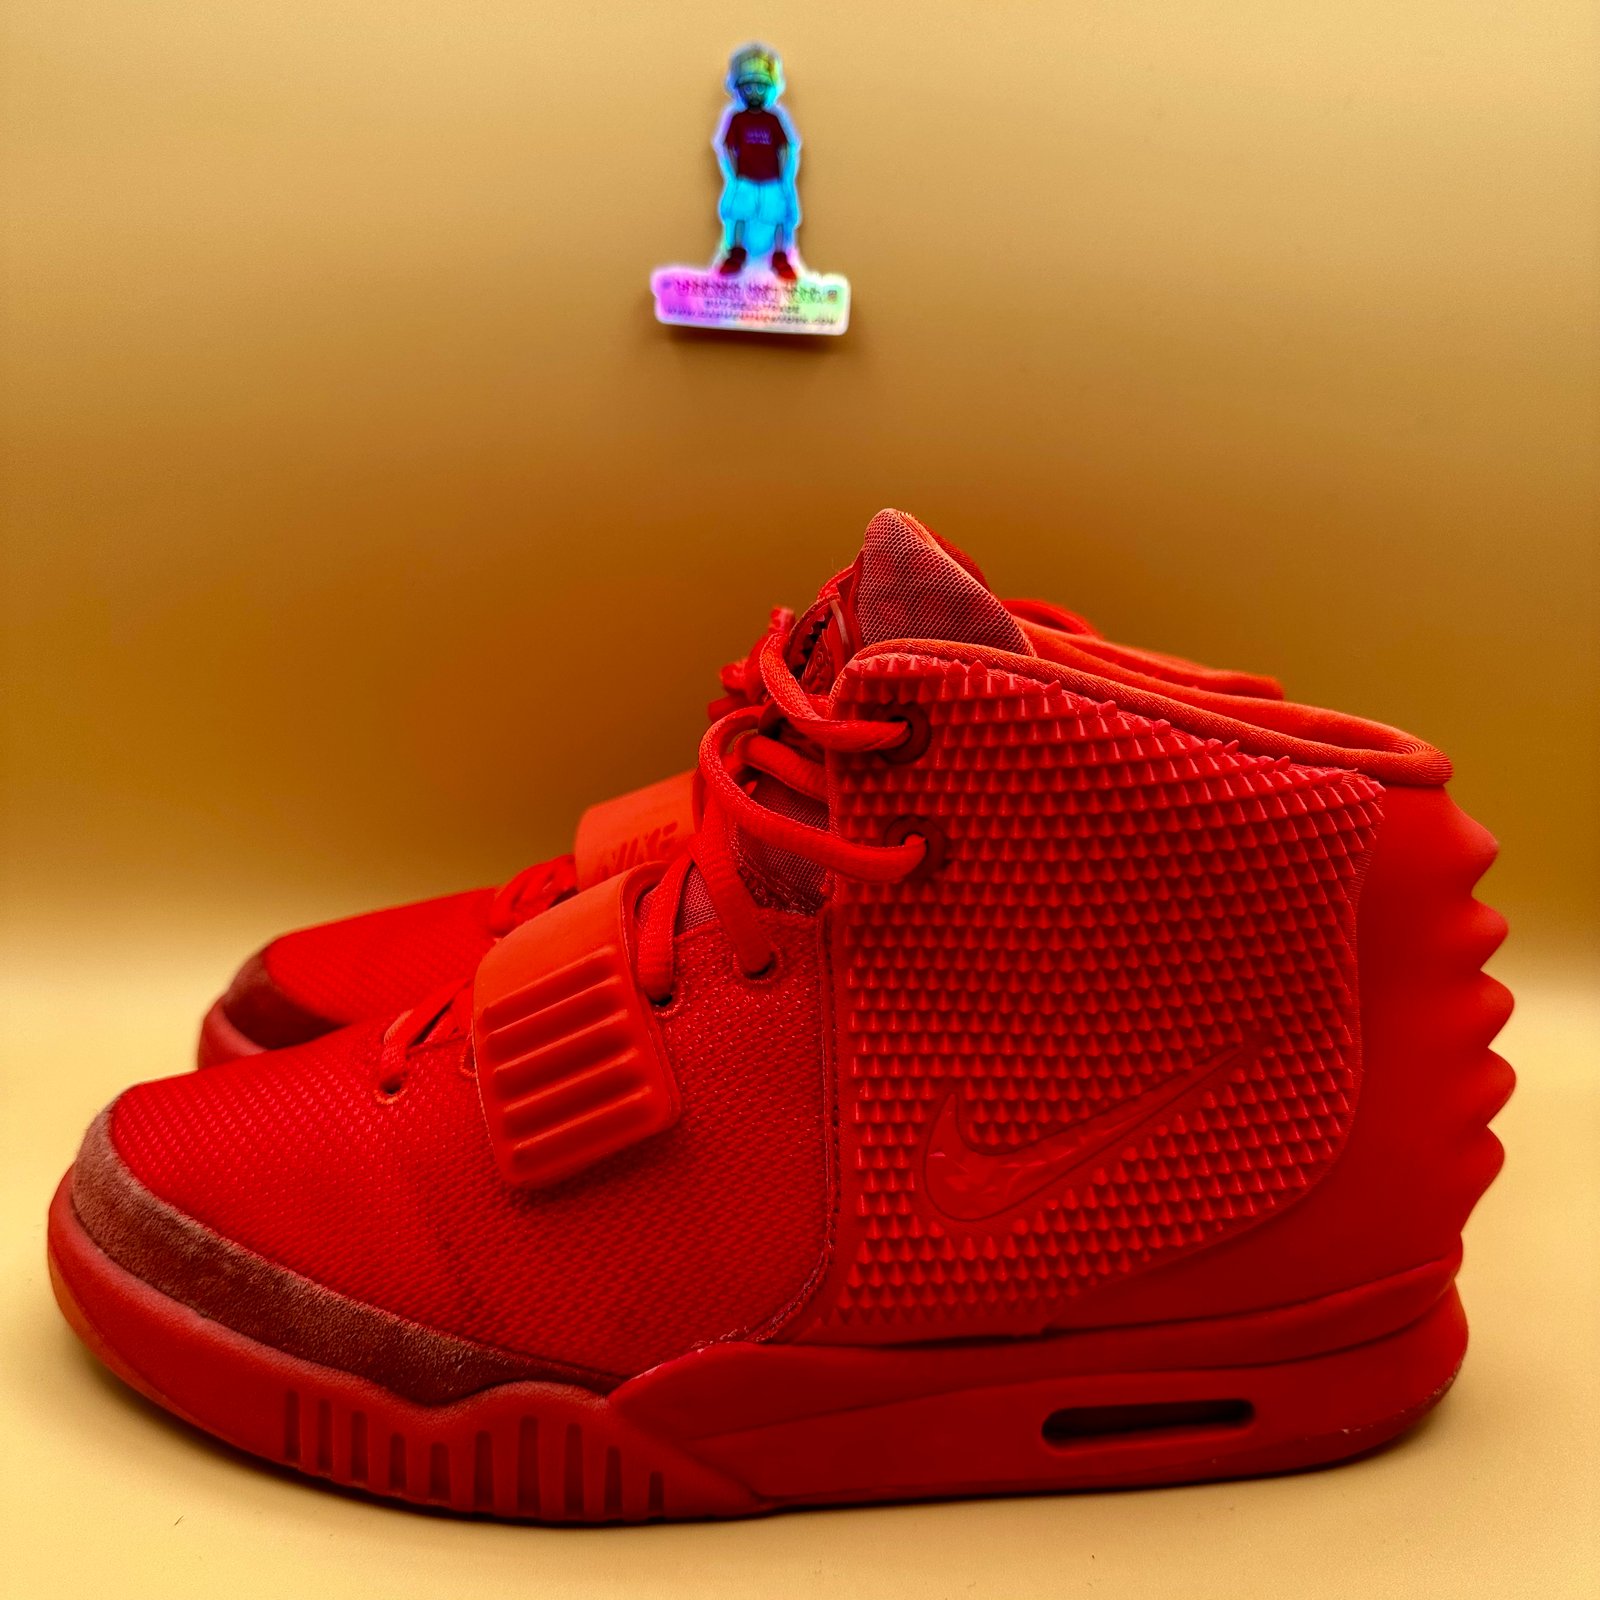 brush Unmanned Anyone 2014 Nike Air Yeezy 2 “RED OCTOBER” (9.5M) | Garment New York